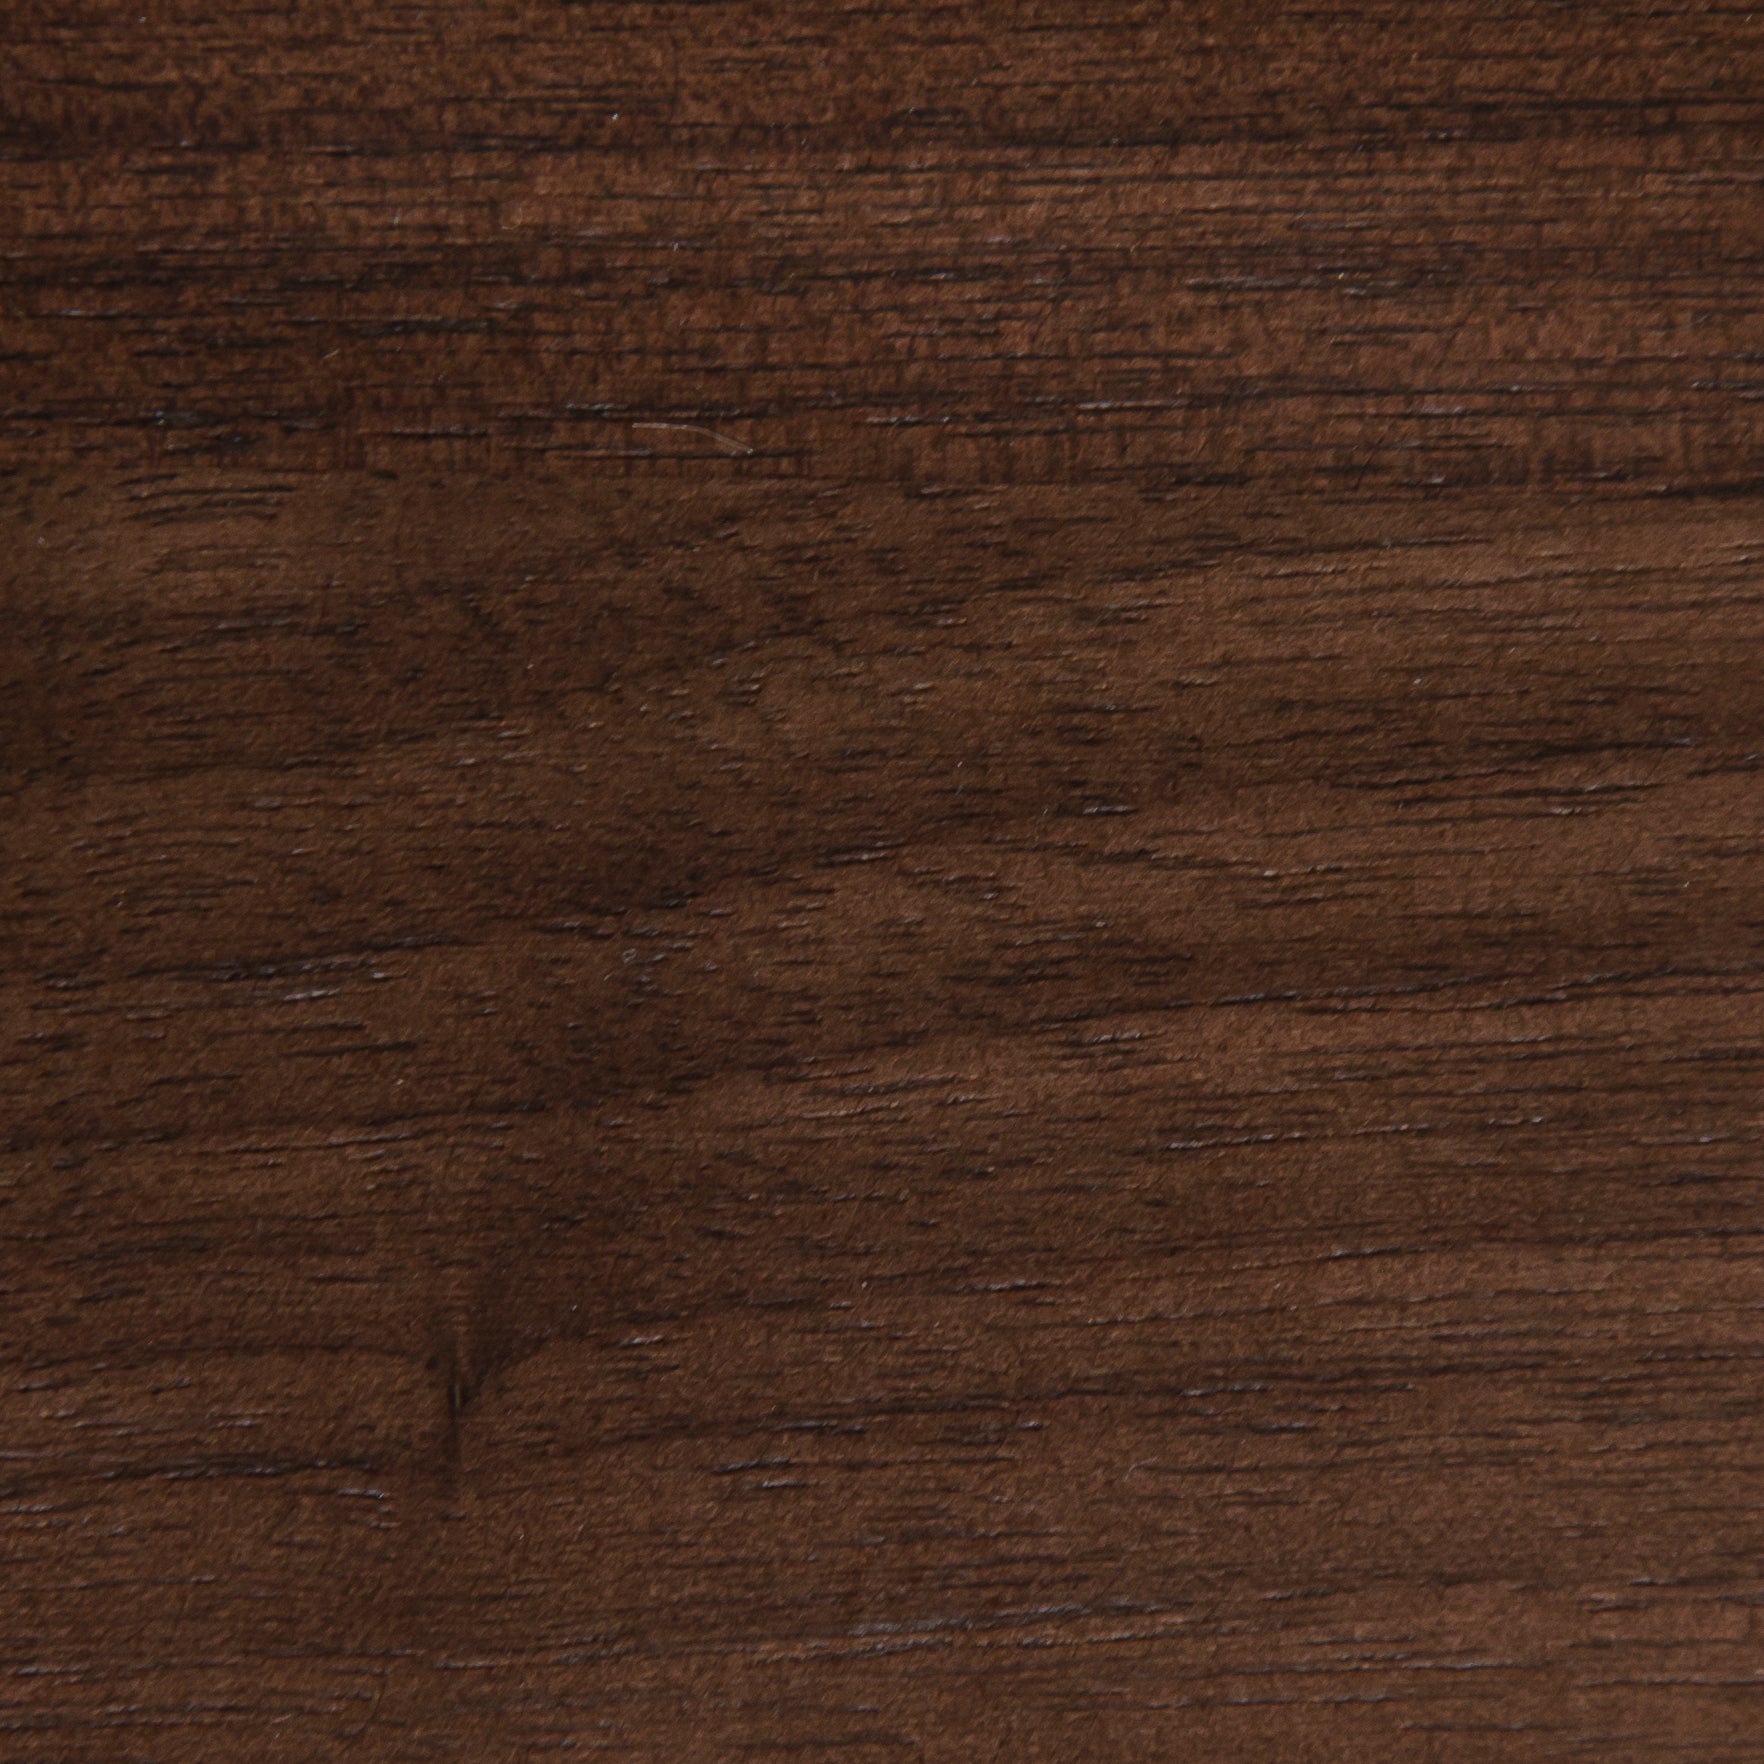 A close up view of a dark brown wood surface.